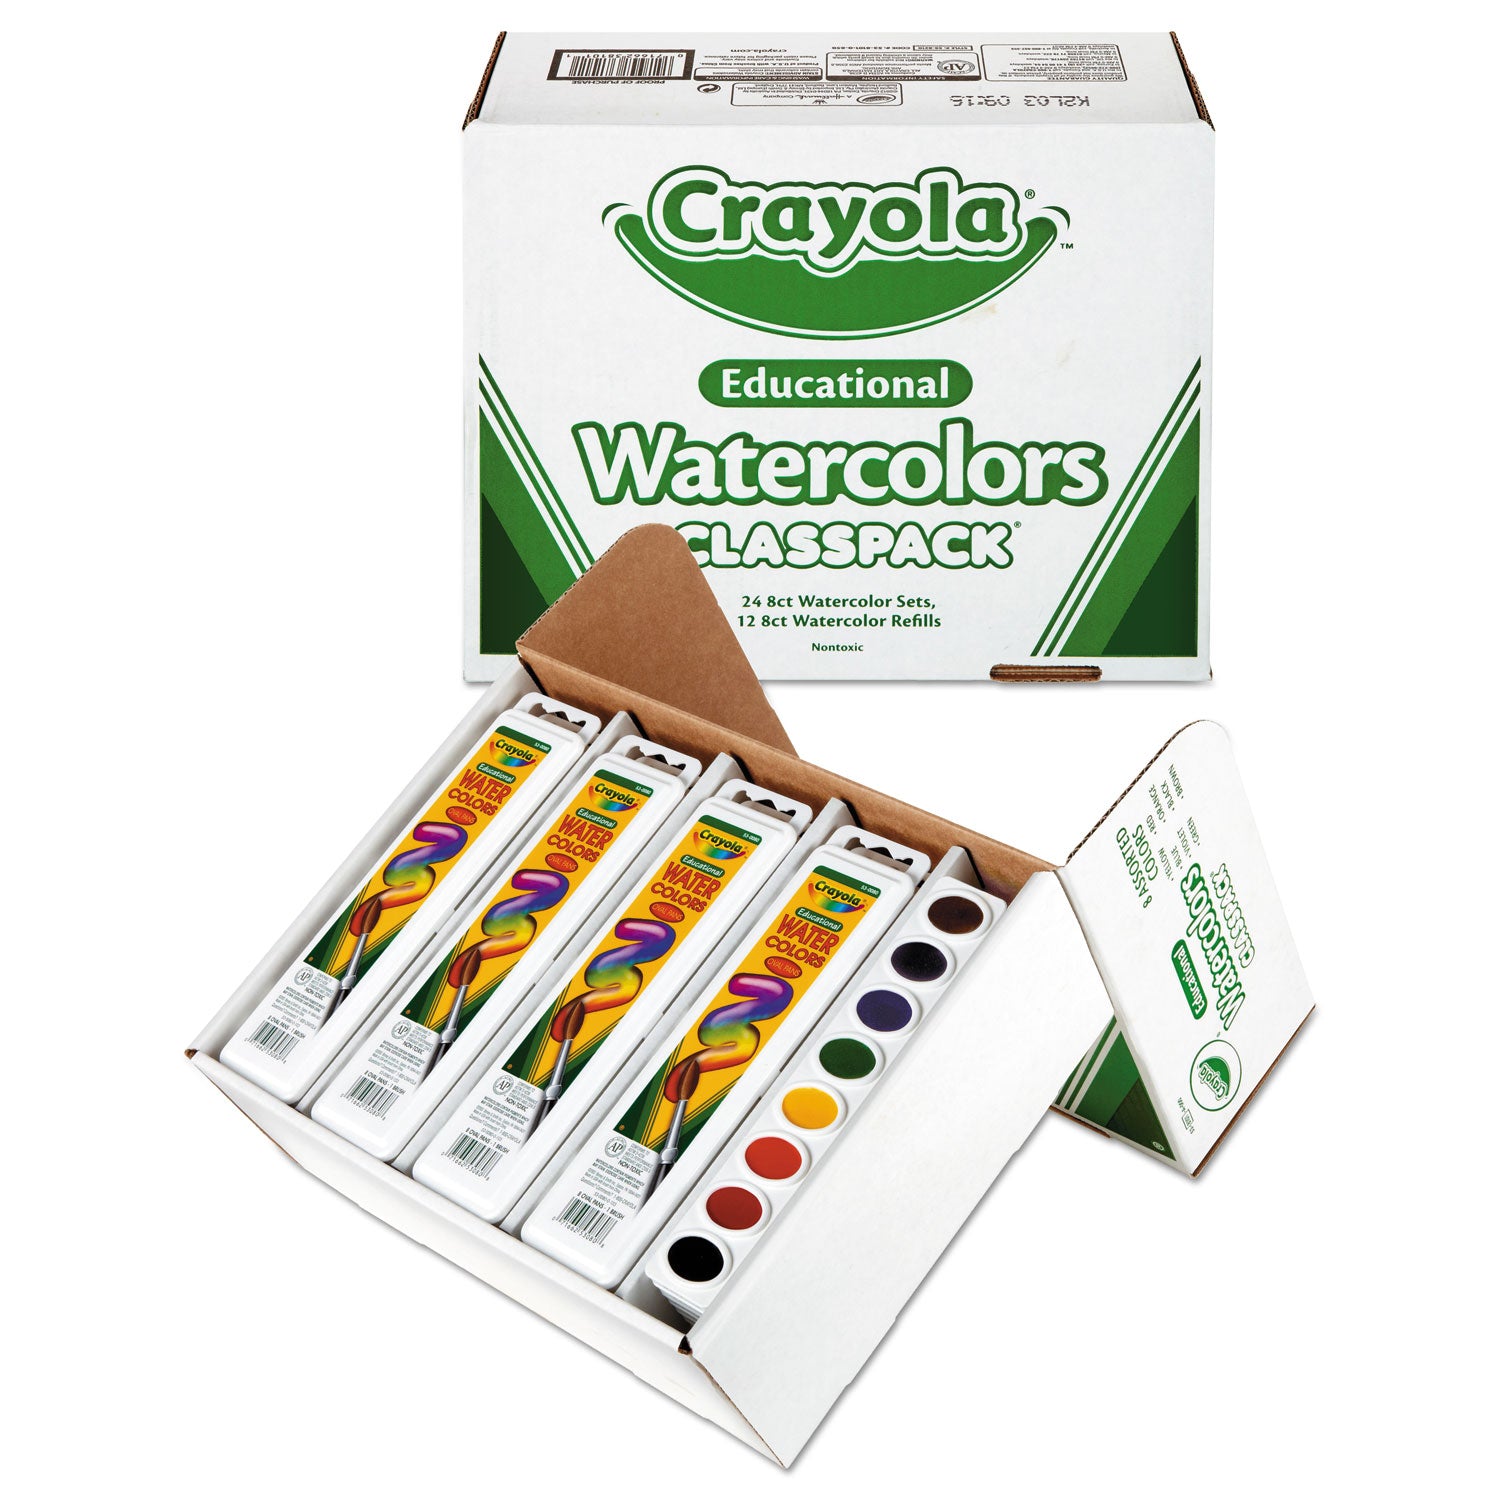 Watercolors, 8 Assorted Colors, Palette Tray, 36/Carton - 